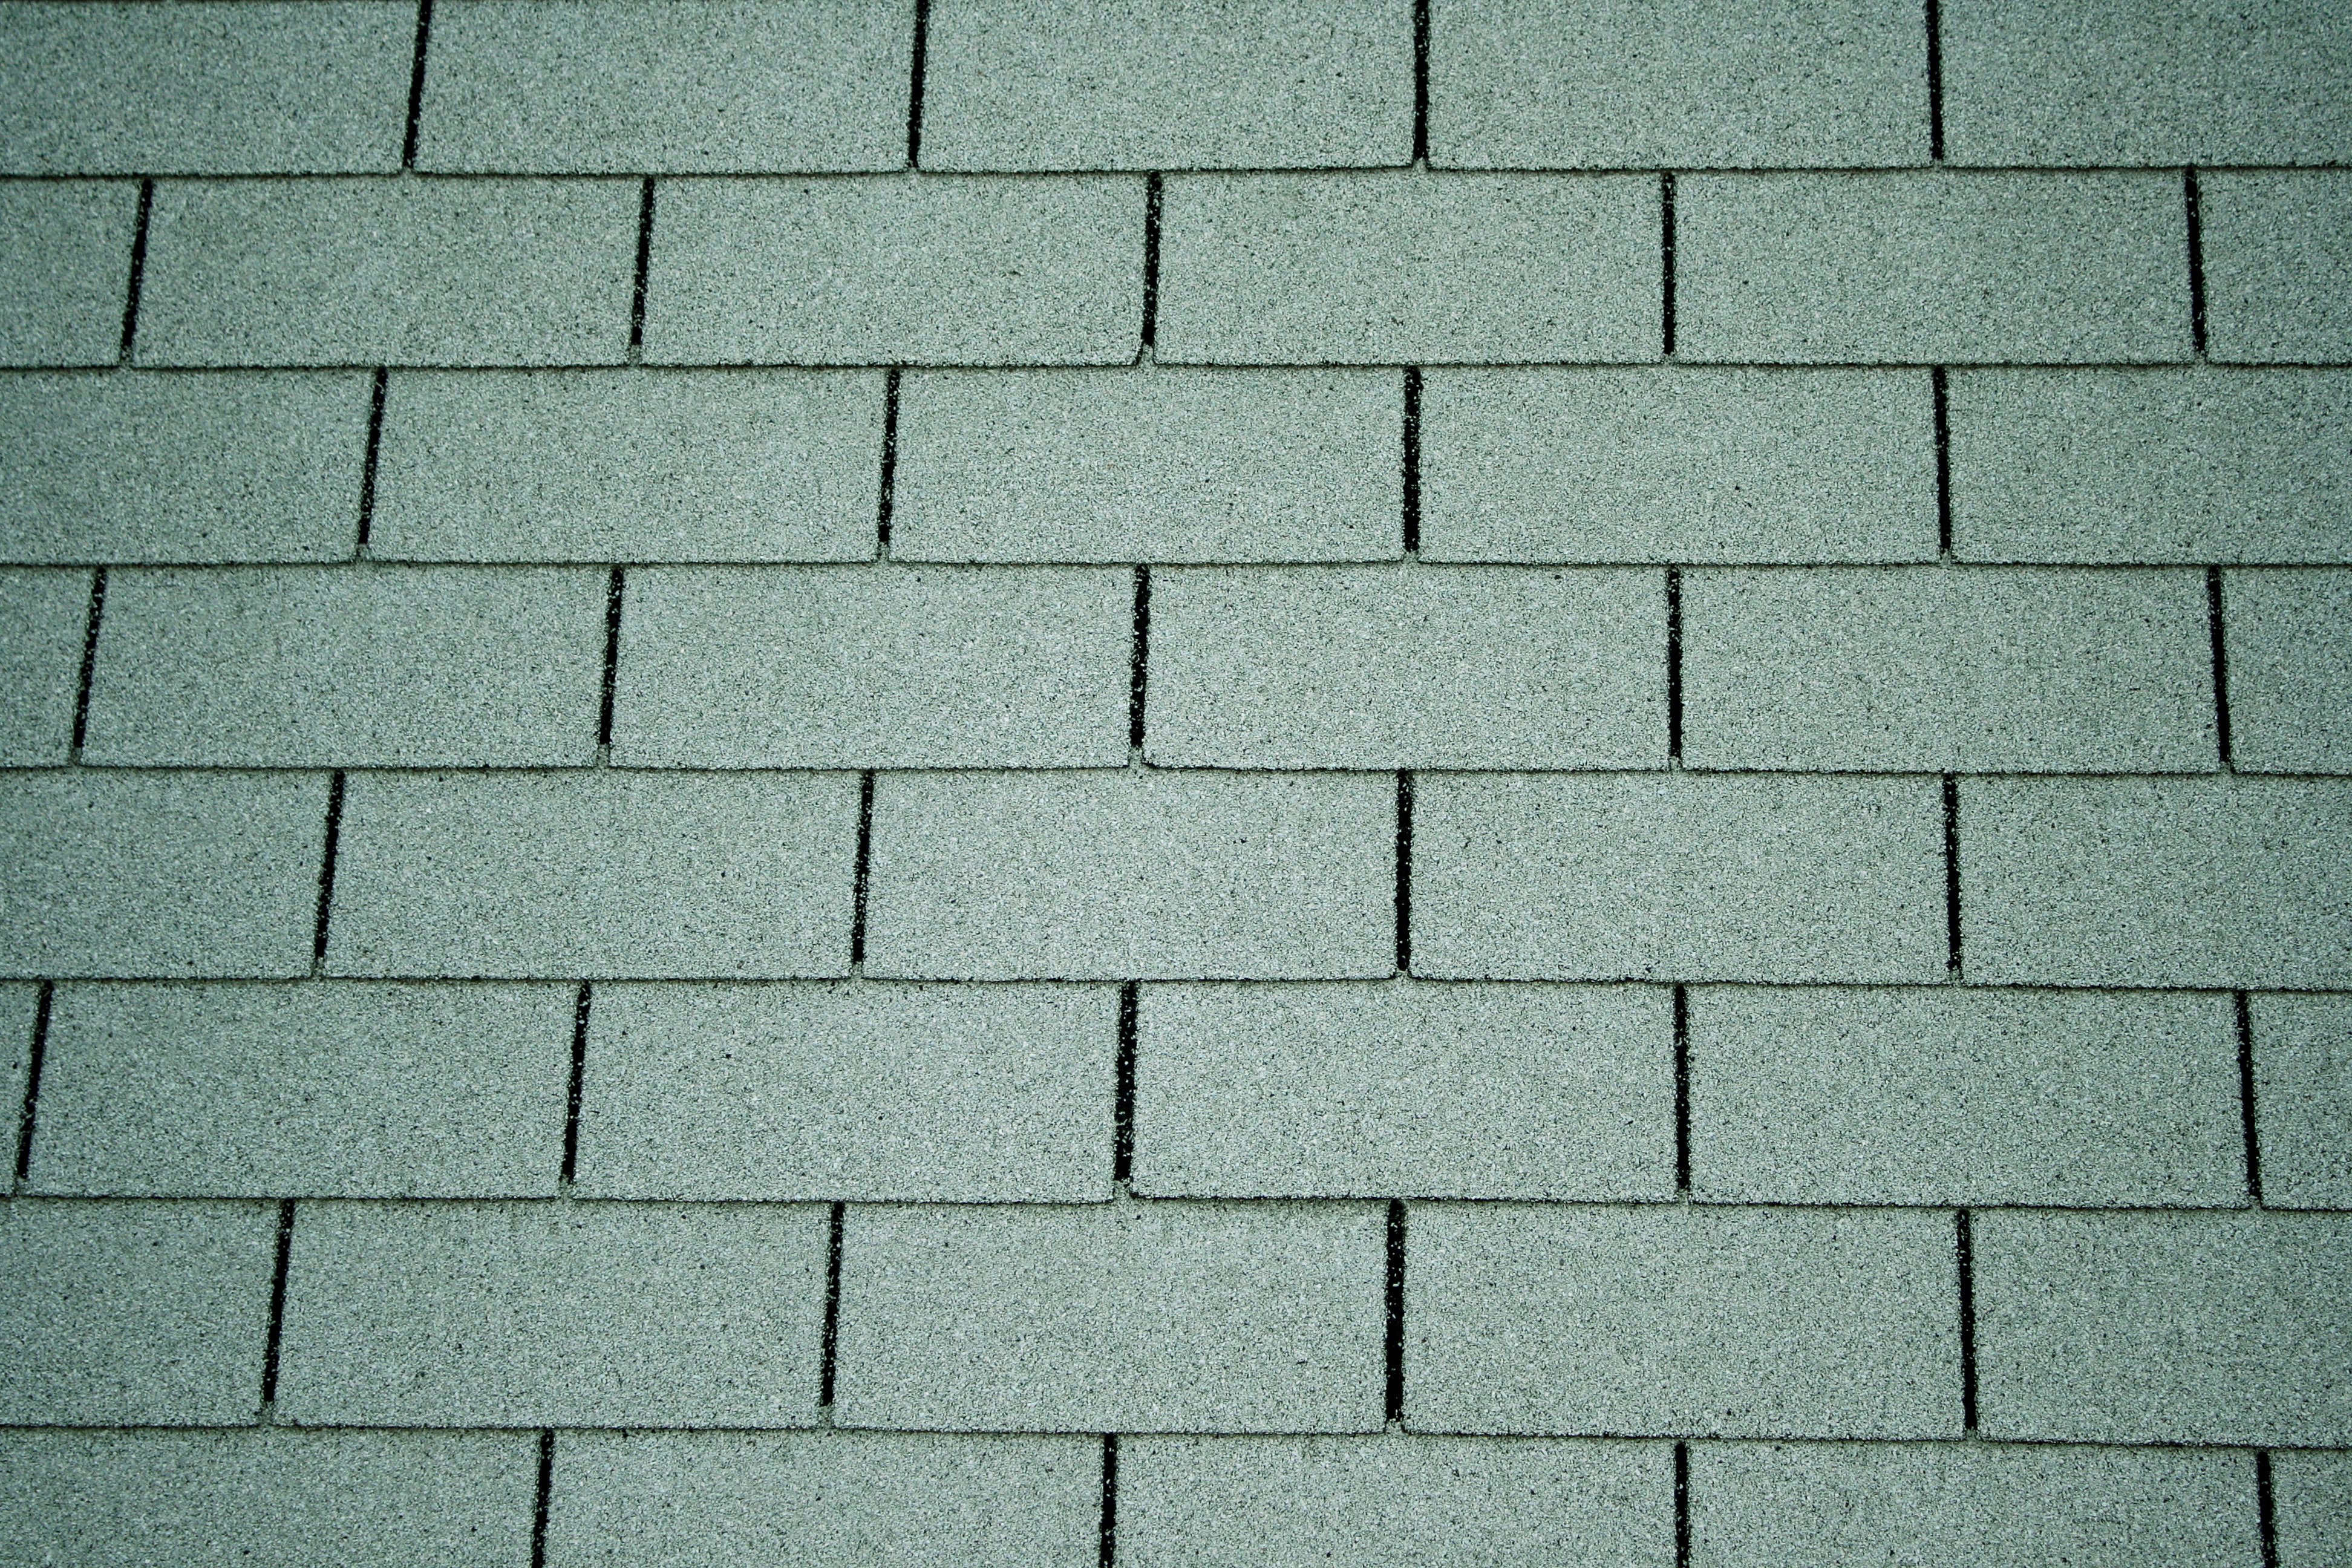 Light Green Asphalt Roof Shingles Texture Picture | Free Photograph